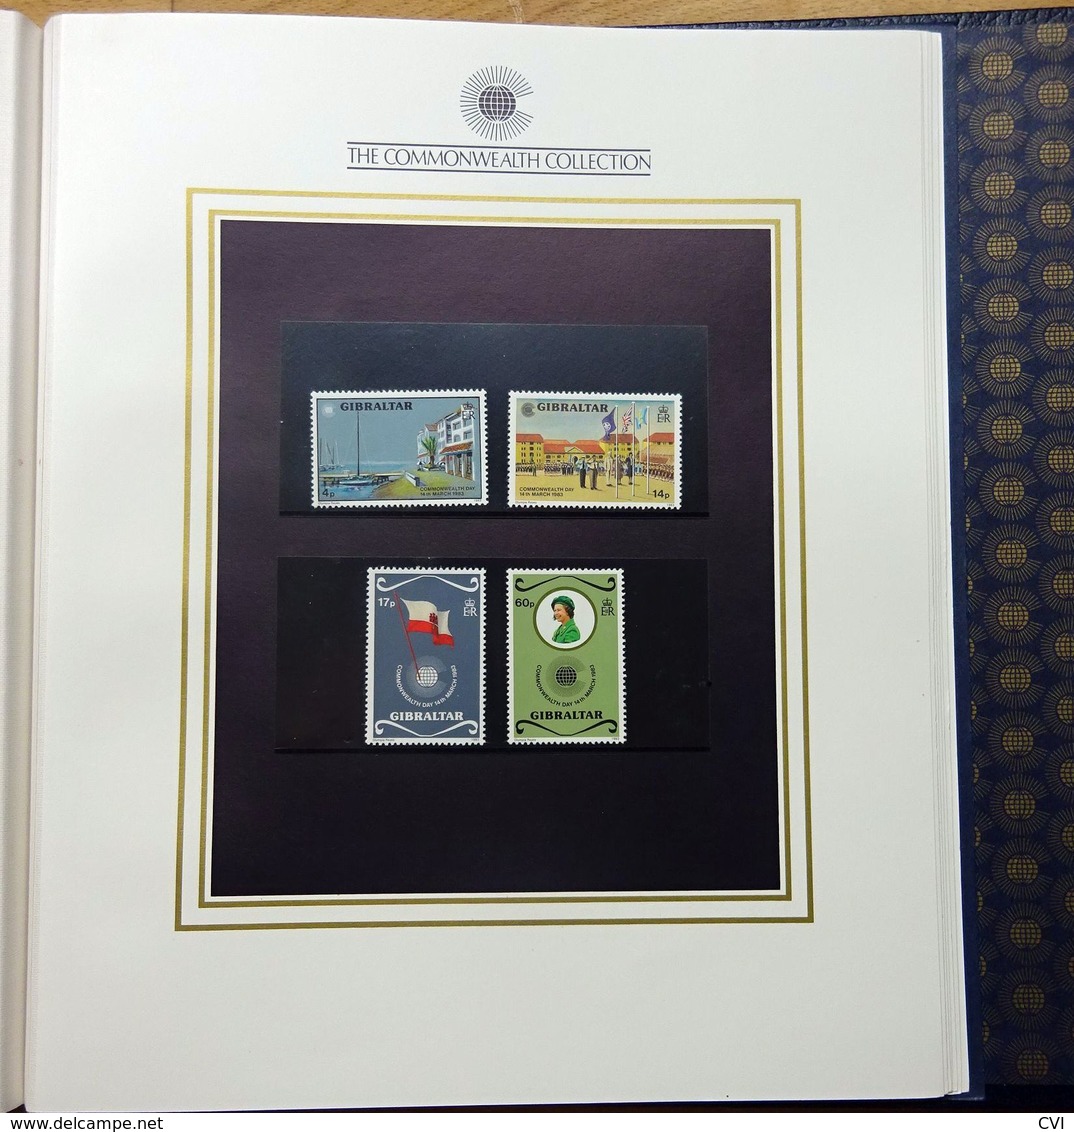 1983 The Commonwealth Collection MNH COMPLETE in Boxed Album Folder.